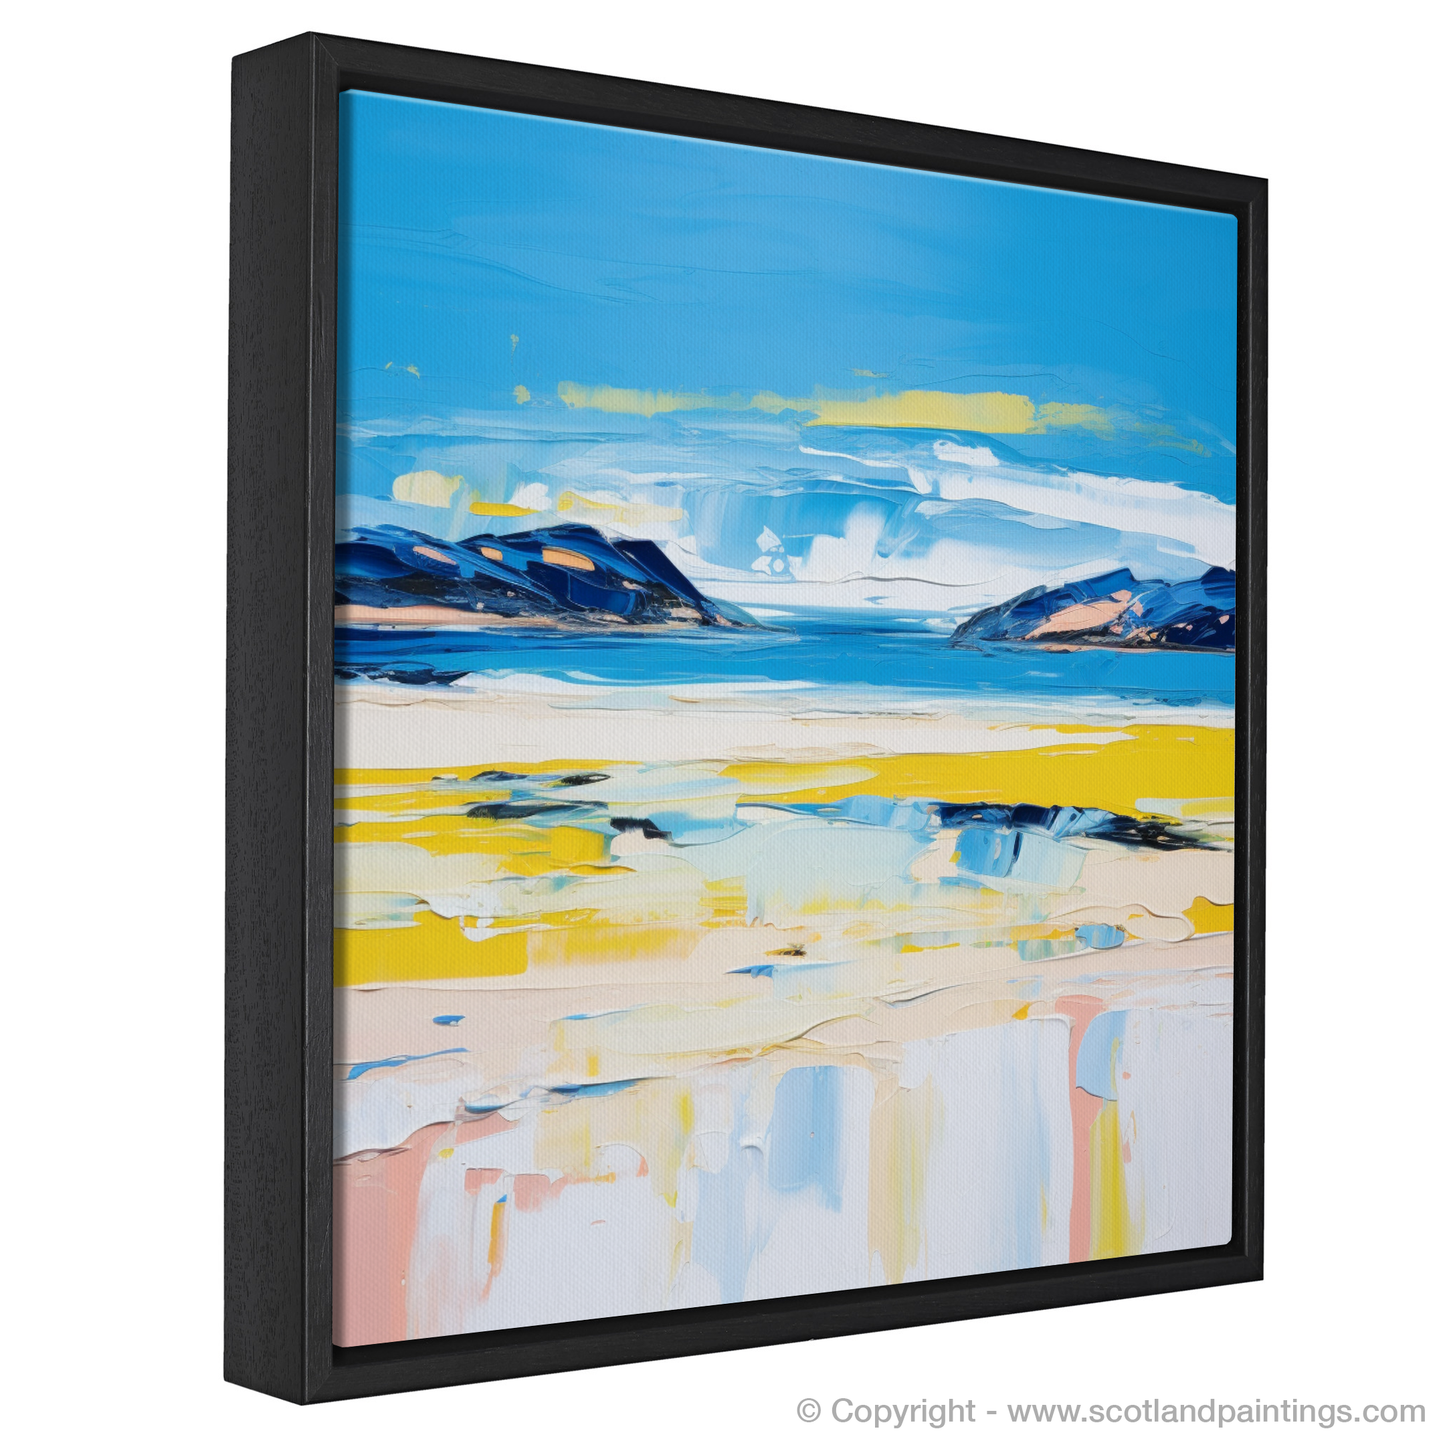 Painting and Art Print of Durness Beach, Sutherland in summer entitled "Summer Symphony of Durness Beach".